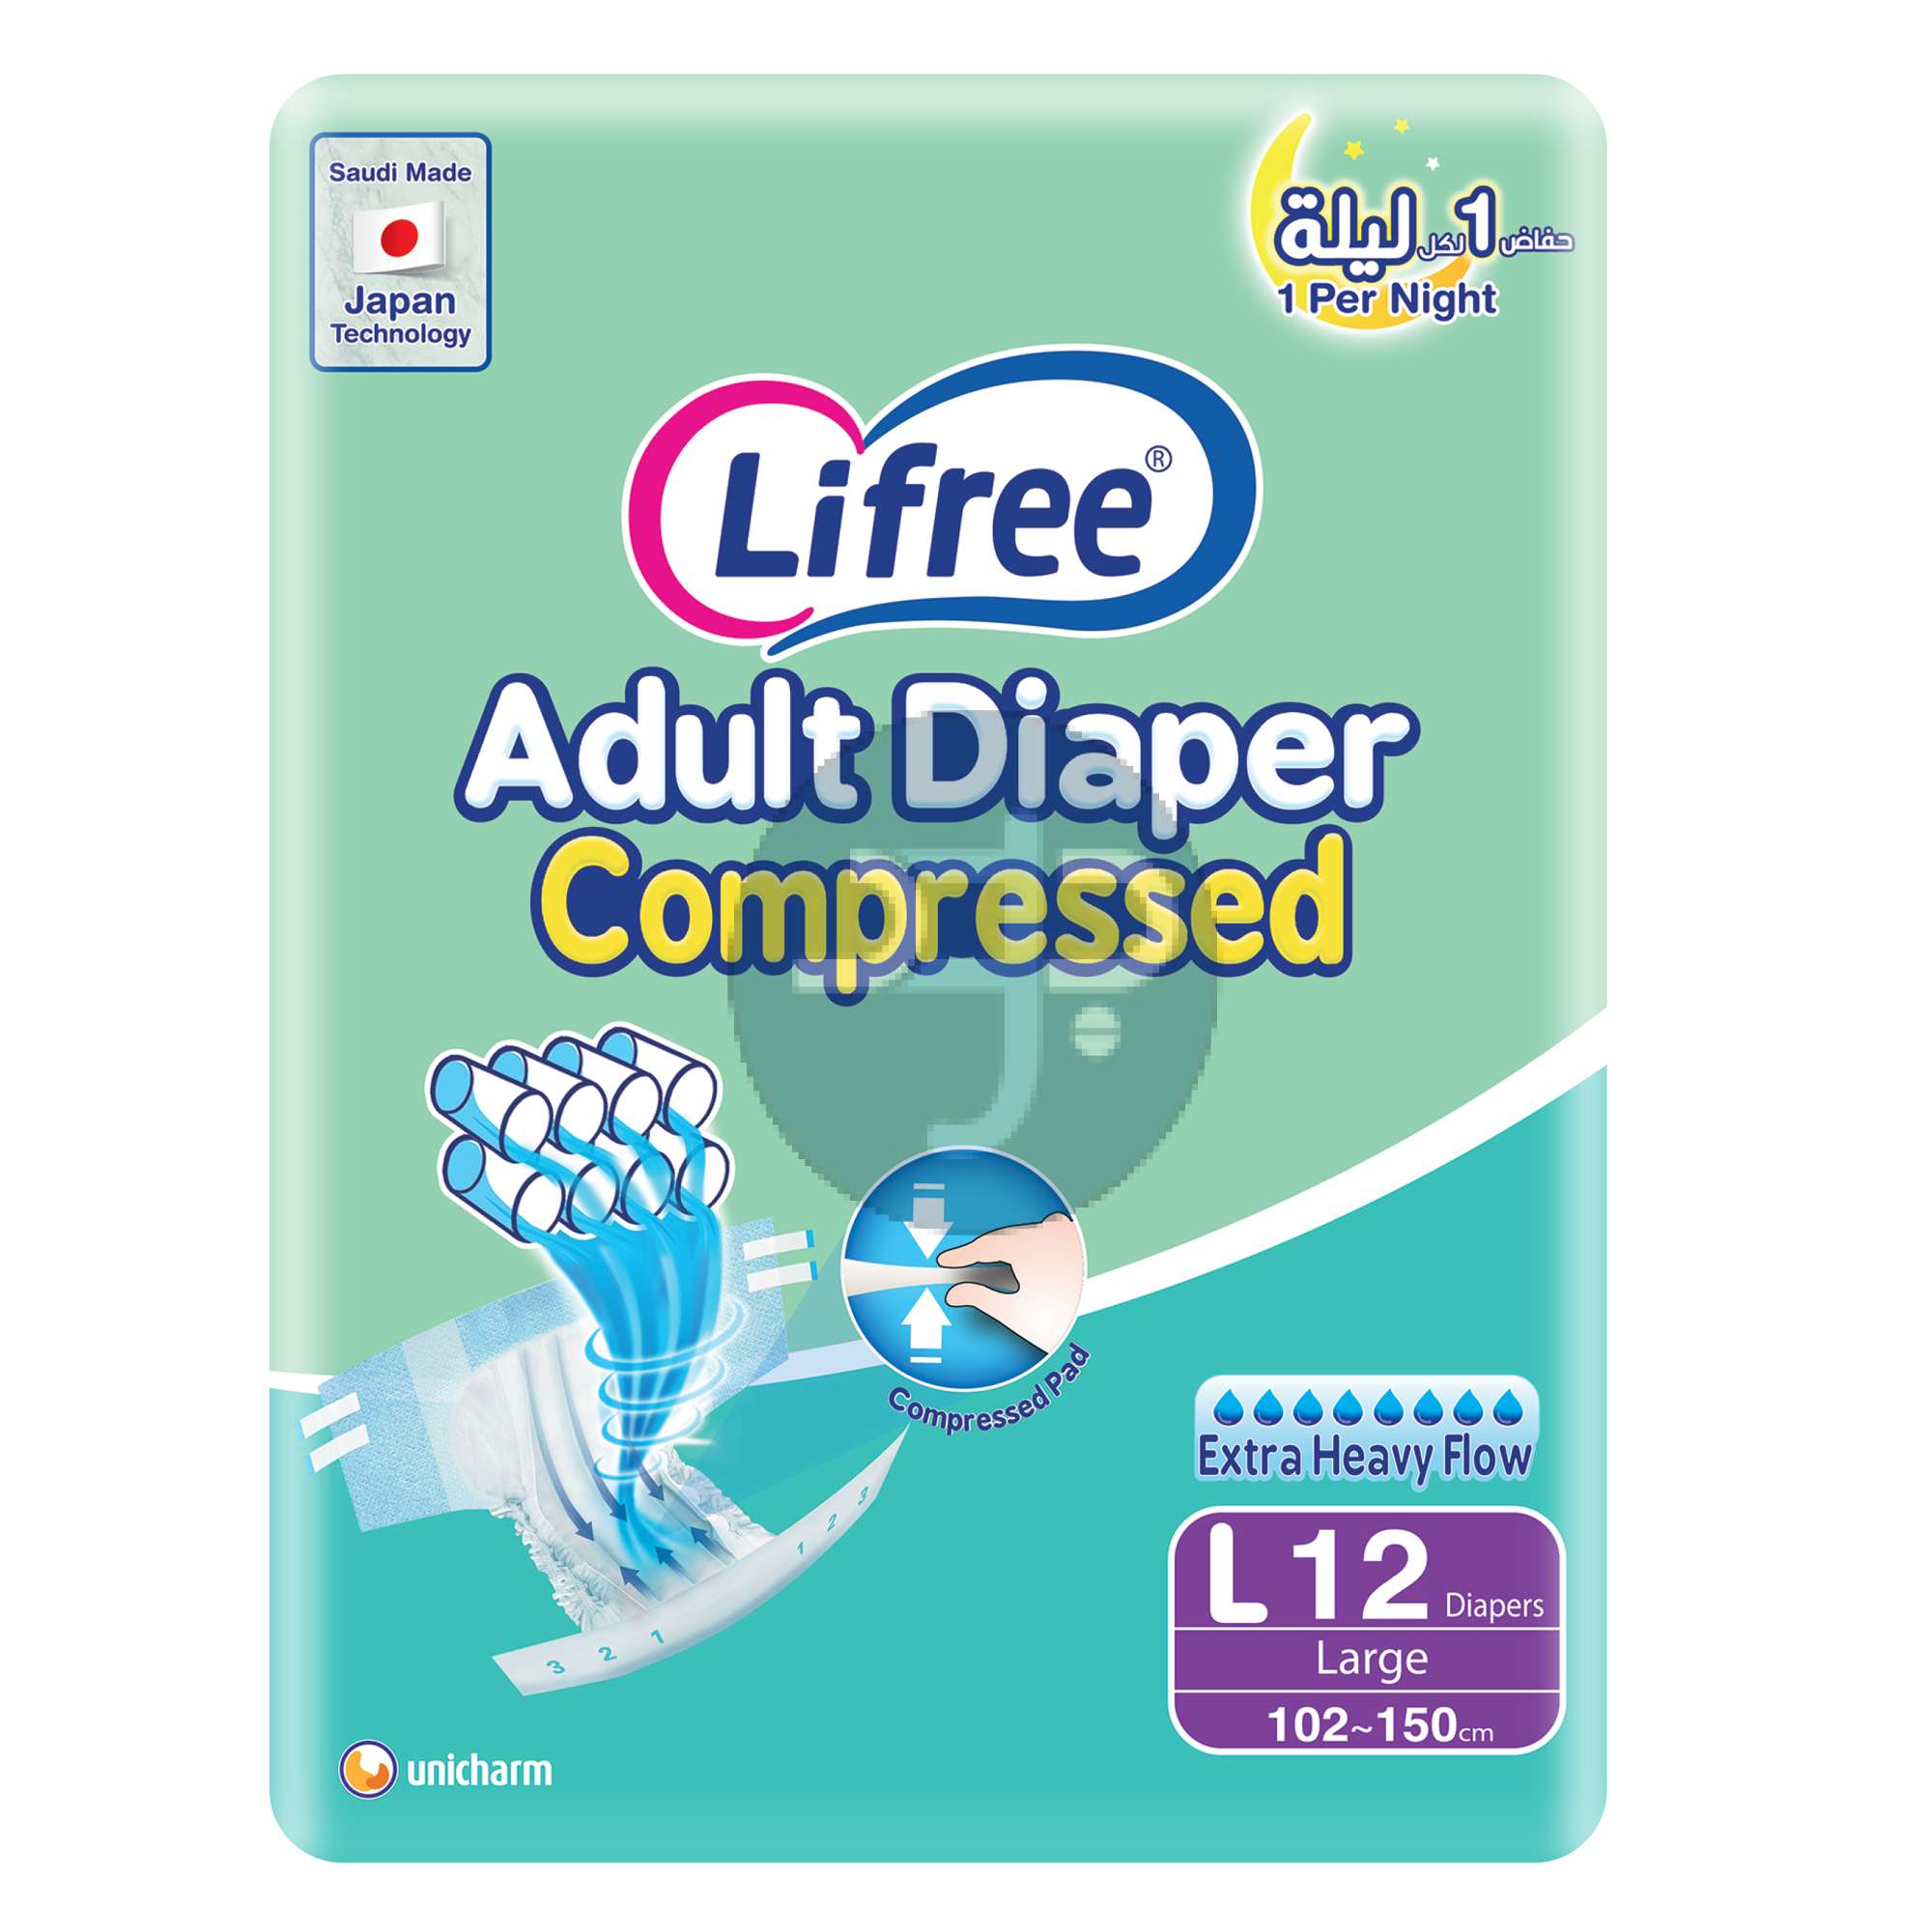 Product-Lifree Compressed Adult Diaper Tape, Large Size , 8 Cup Absorbency, Regular Pack, 12 Pieces